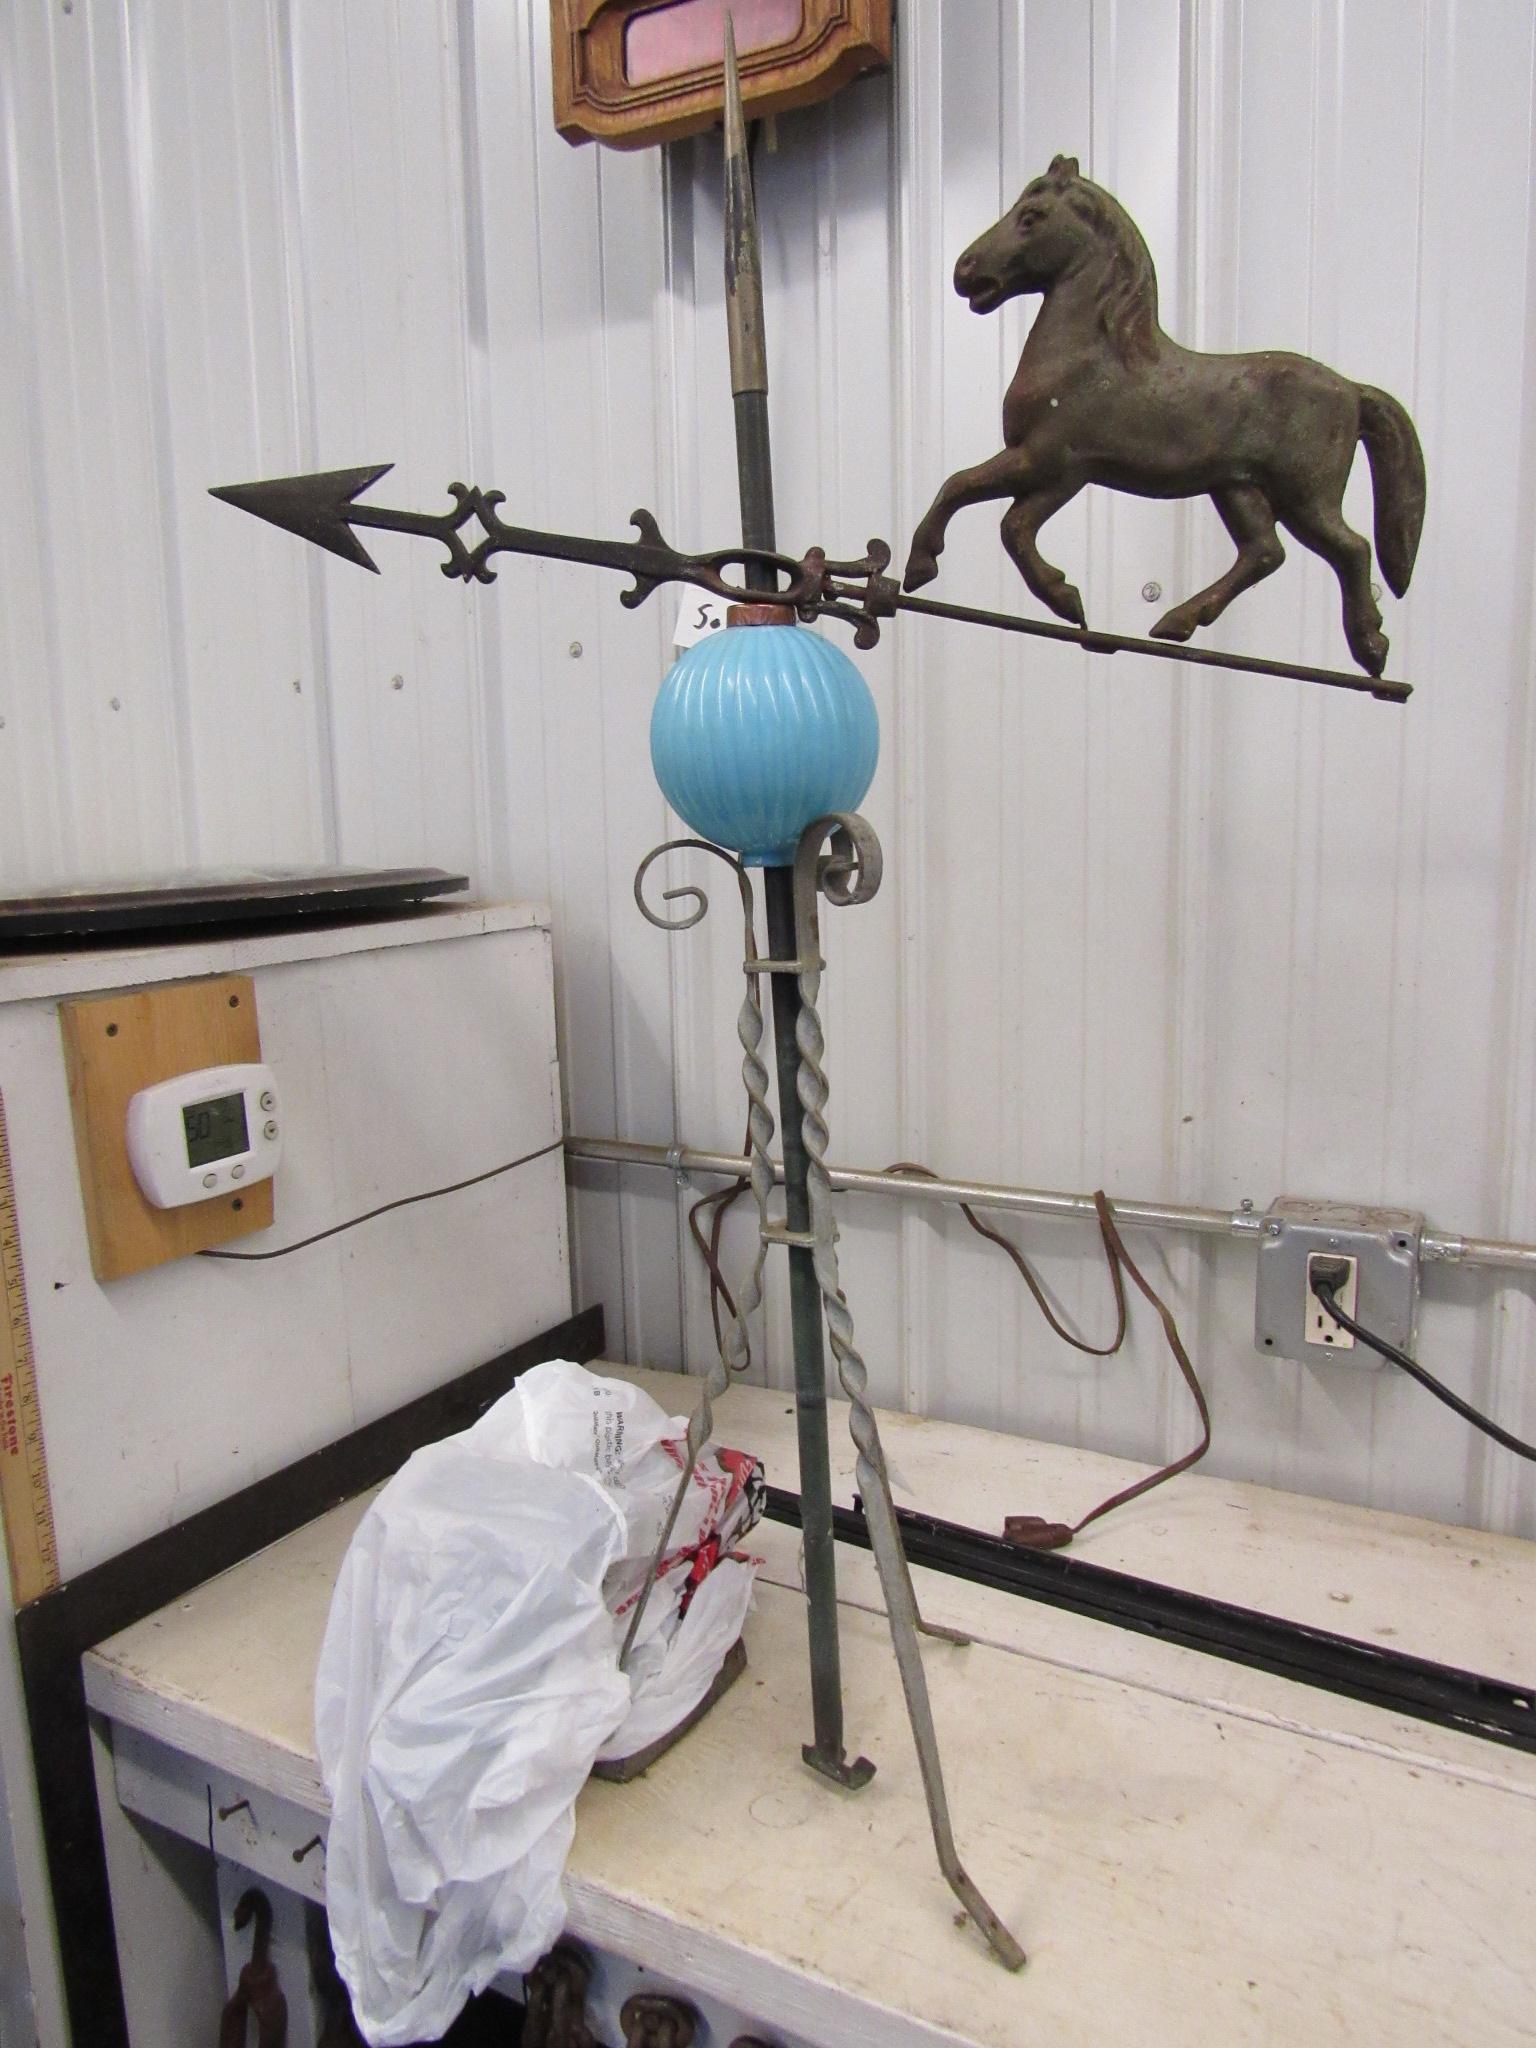 Horse Directional Weather Vane with Blue Lightning Bulb